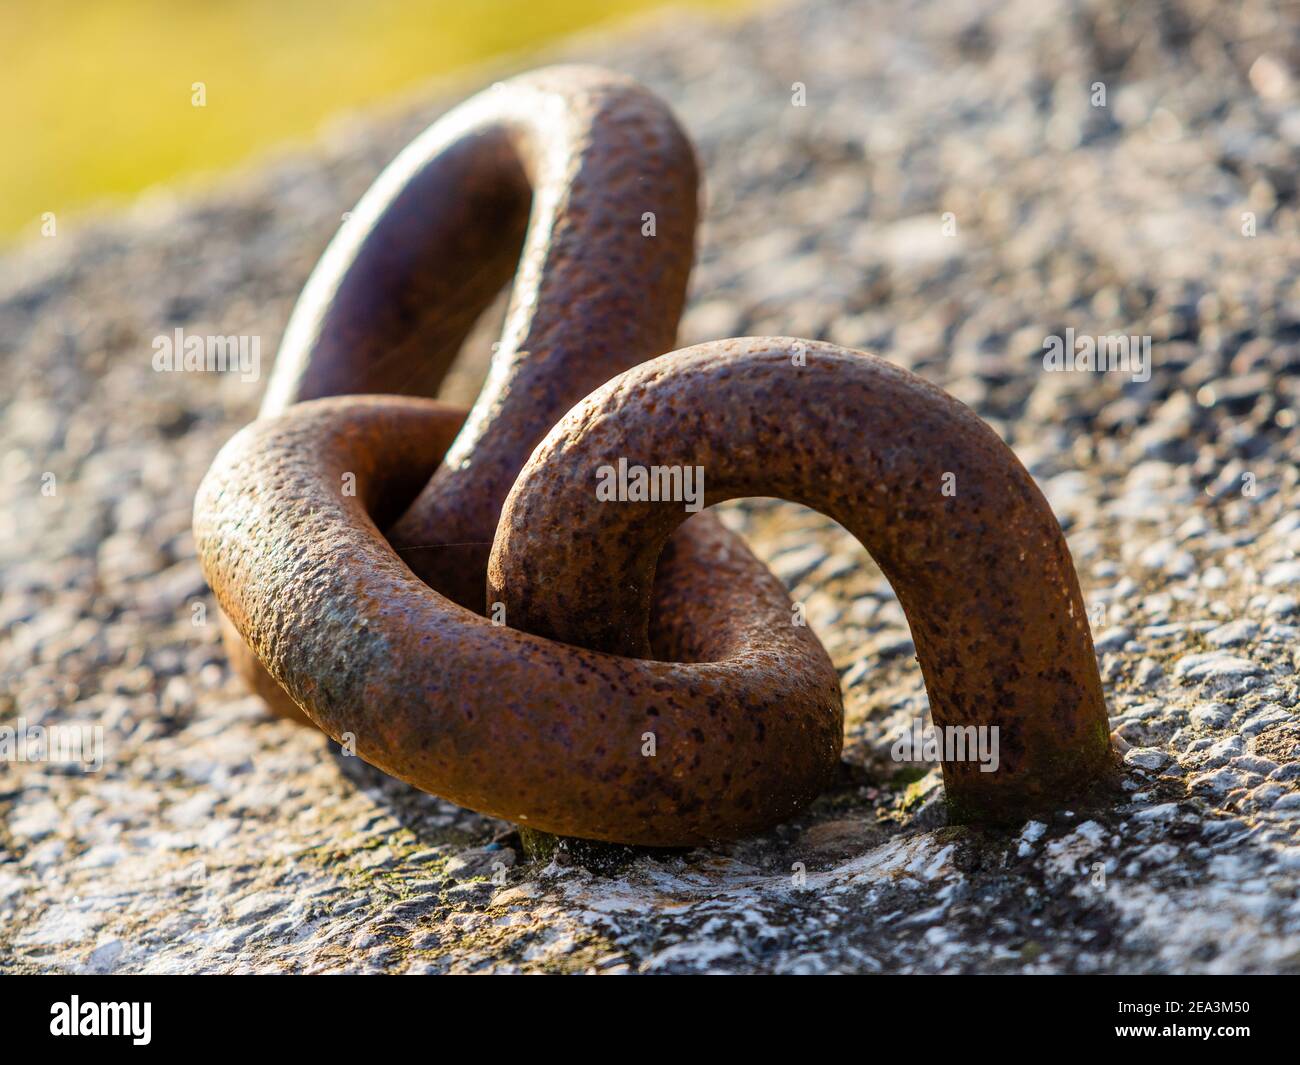 Large rusty chain links used to secure boats and ships. Stock Photo